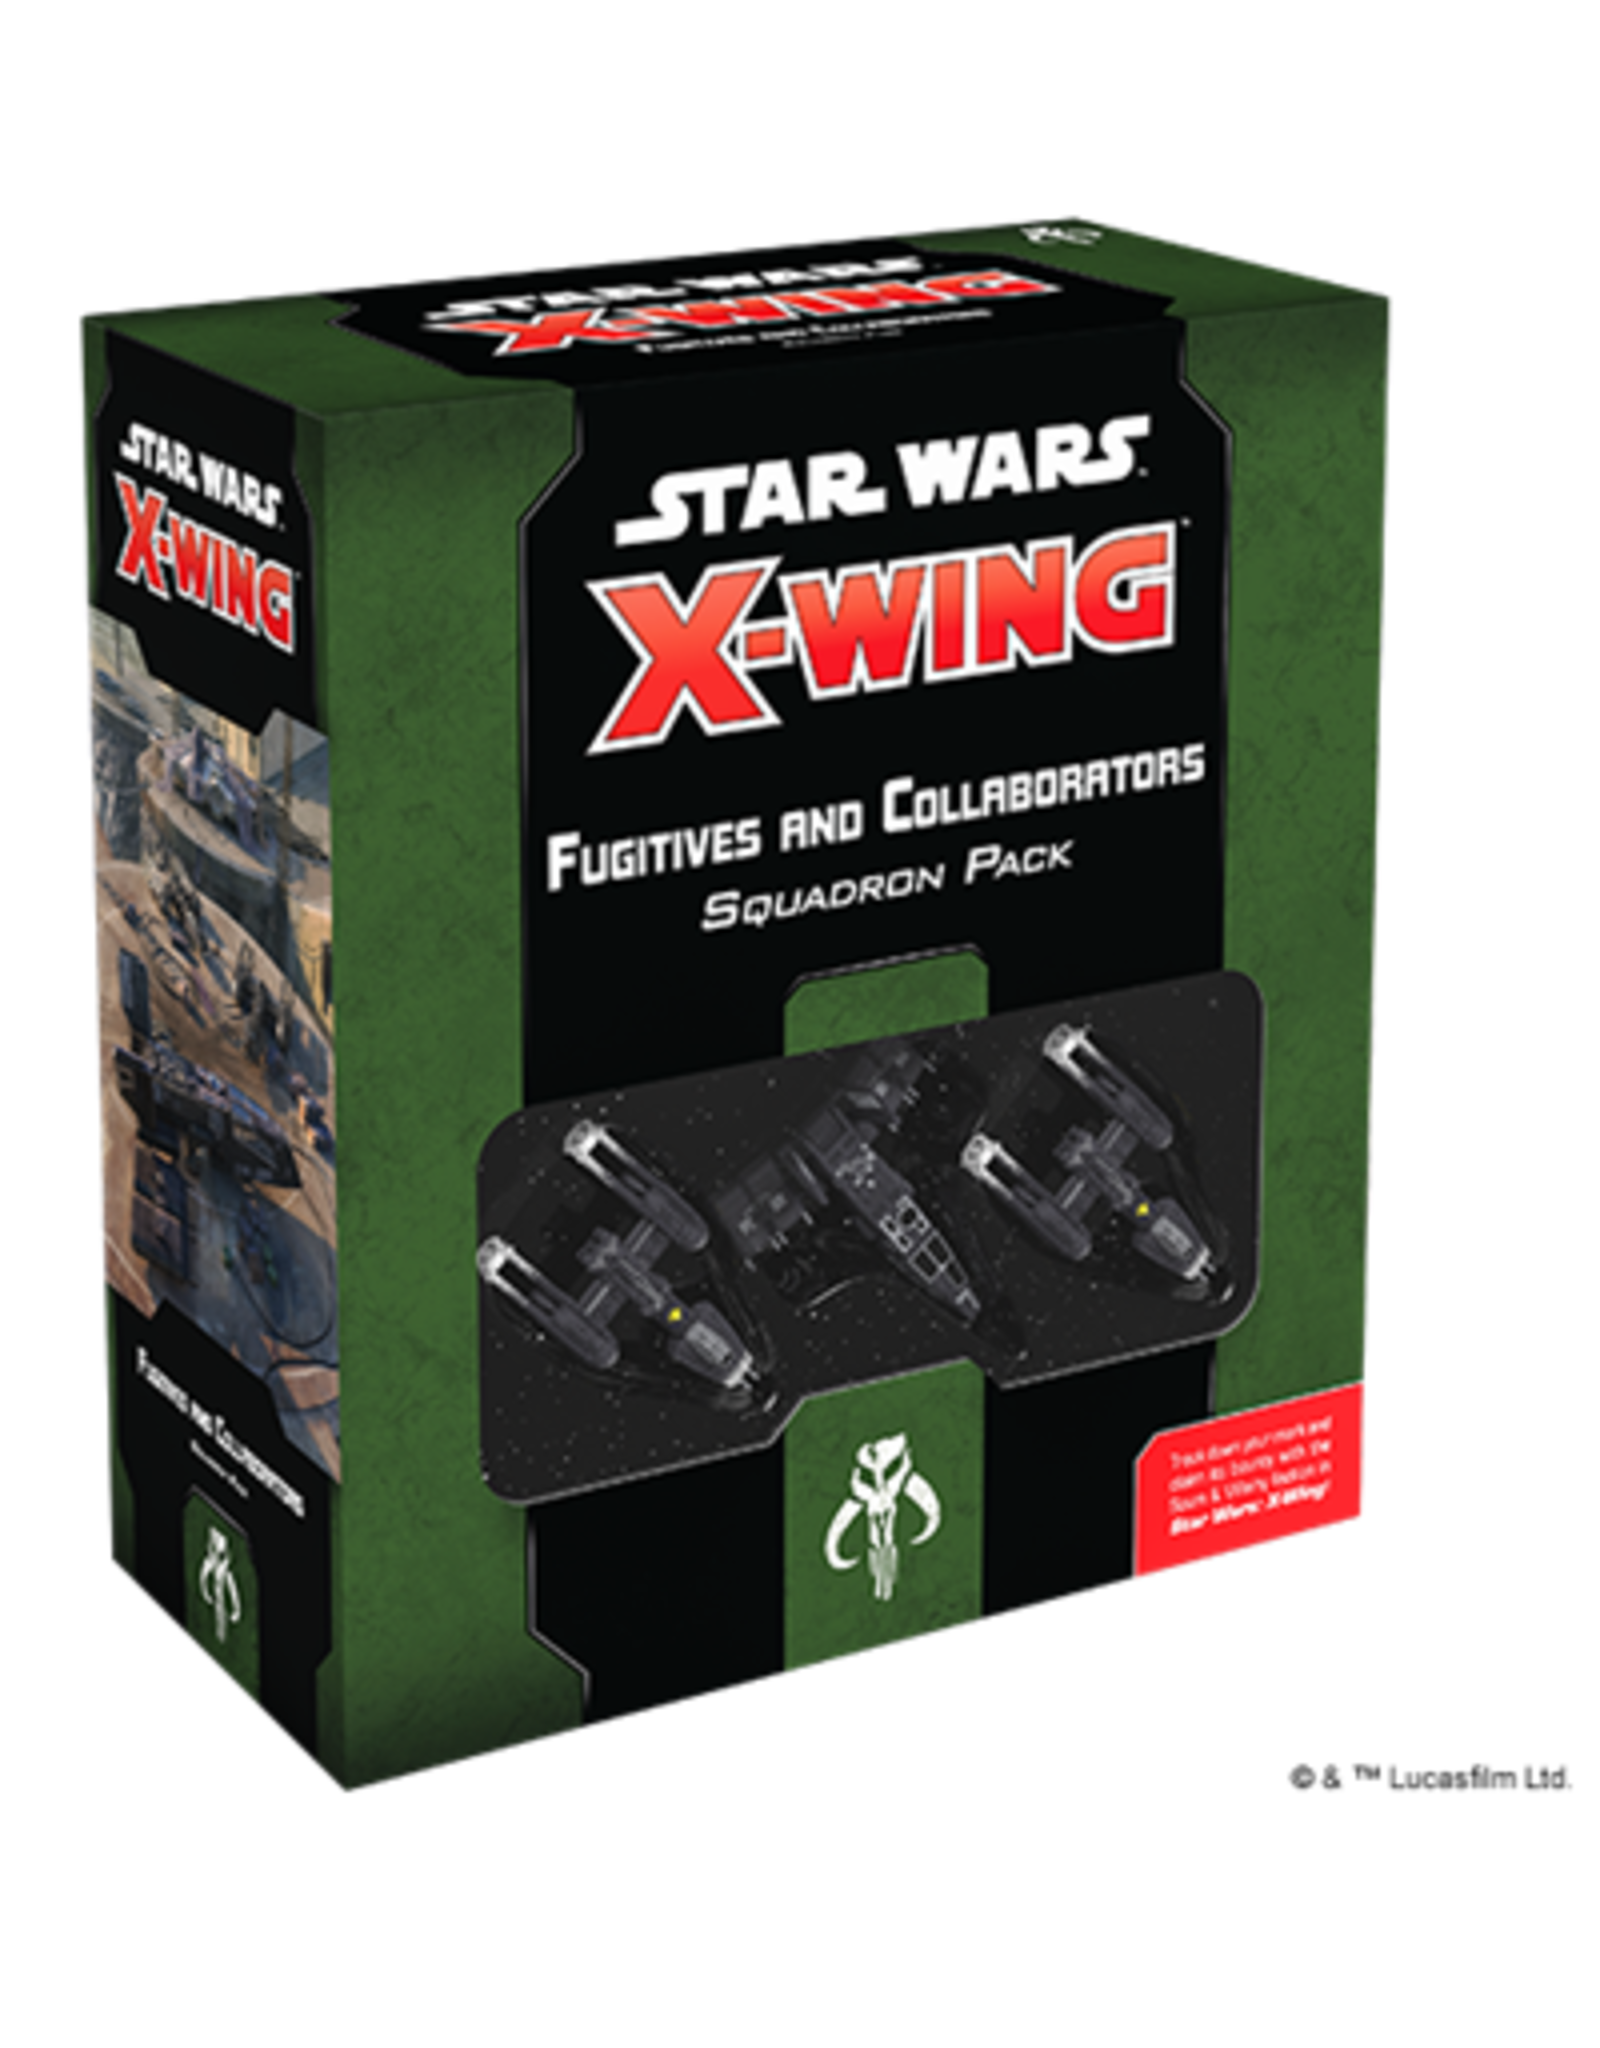 Atomic Mass Games Star Wars X-Wing: Fugitive and Collaborators - 2nd Edition